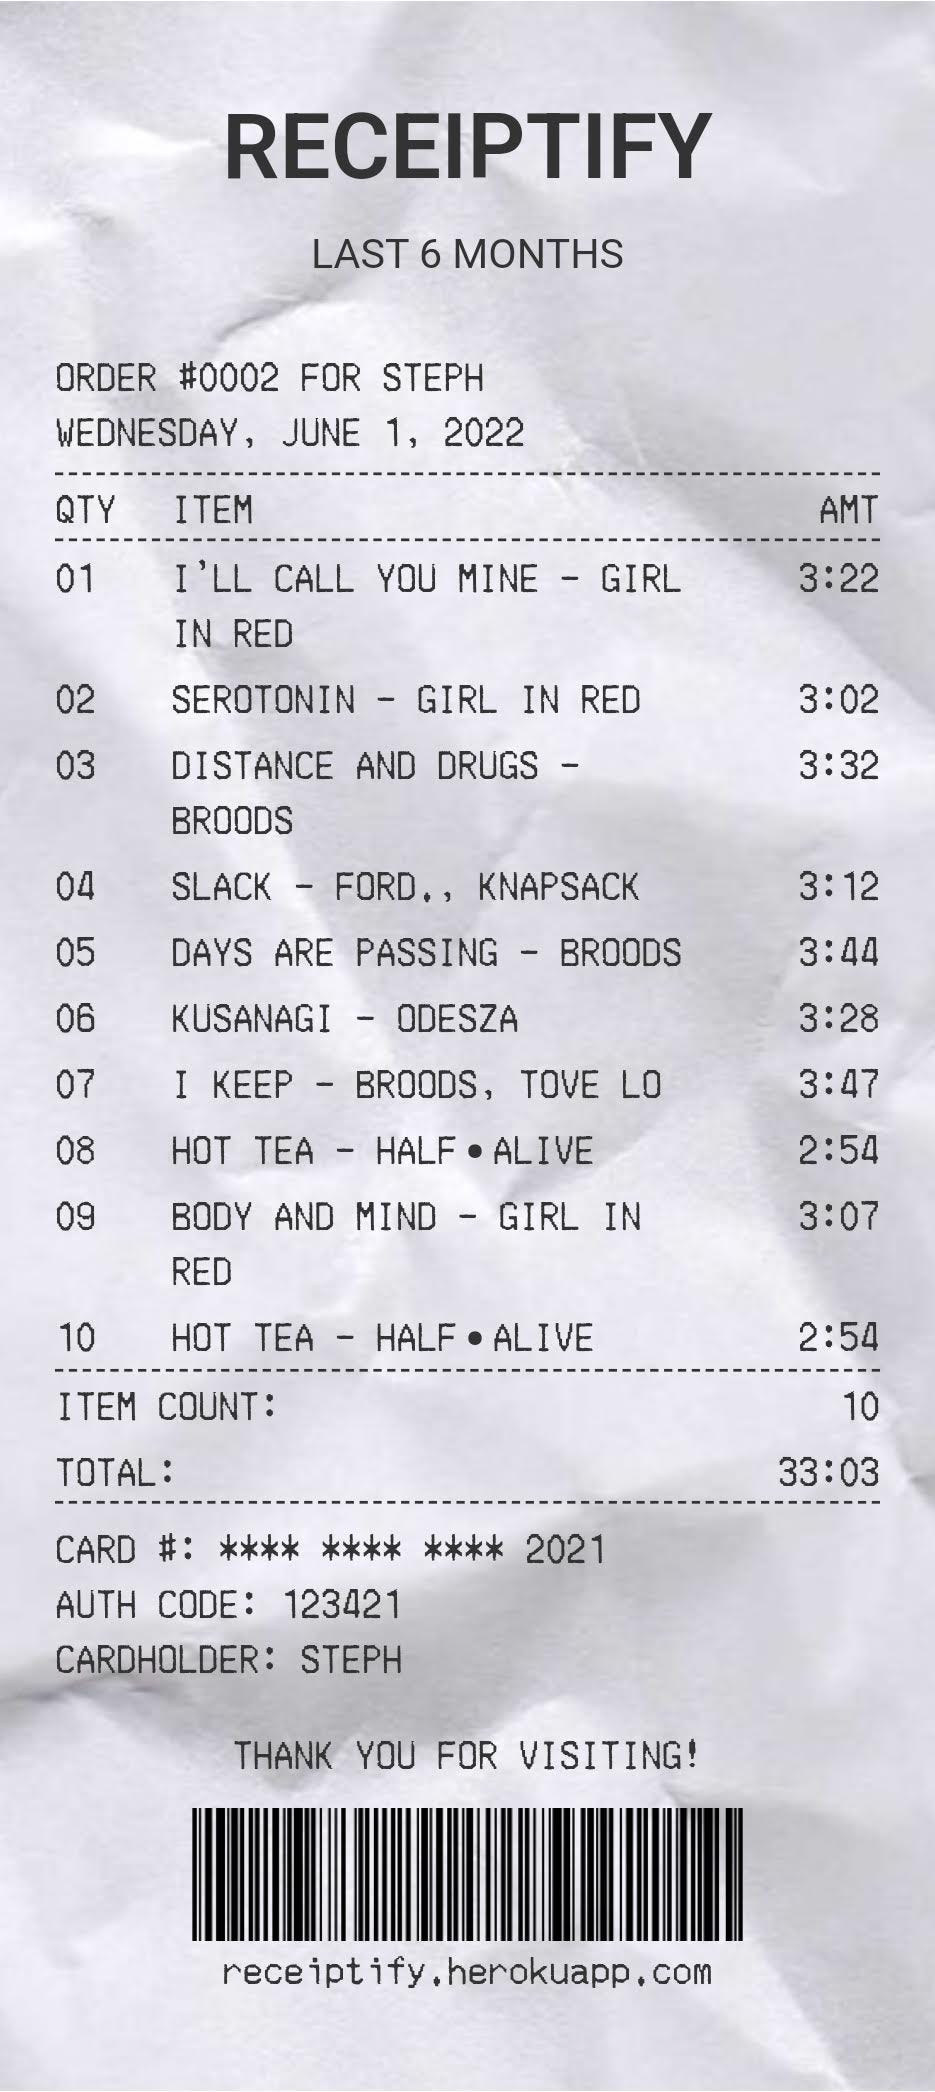 A list of songs stylized like a receipt. Broods and Hot Tea by half-alive are featured heavily.